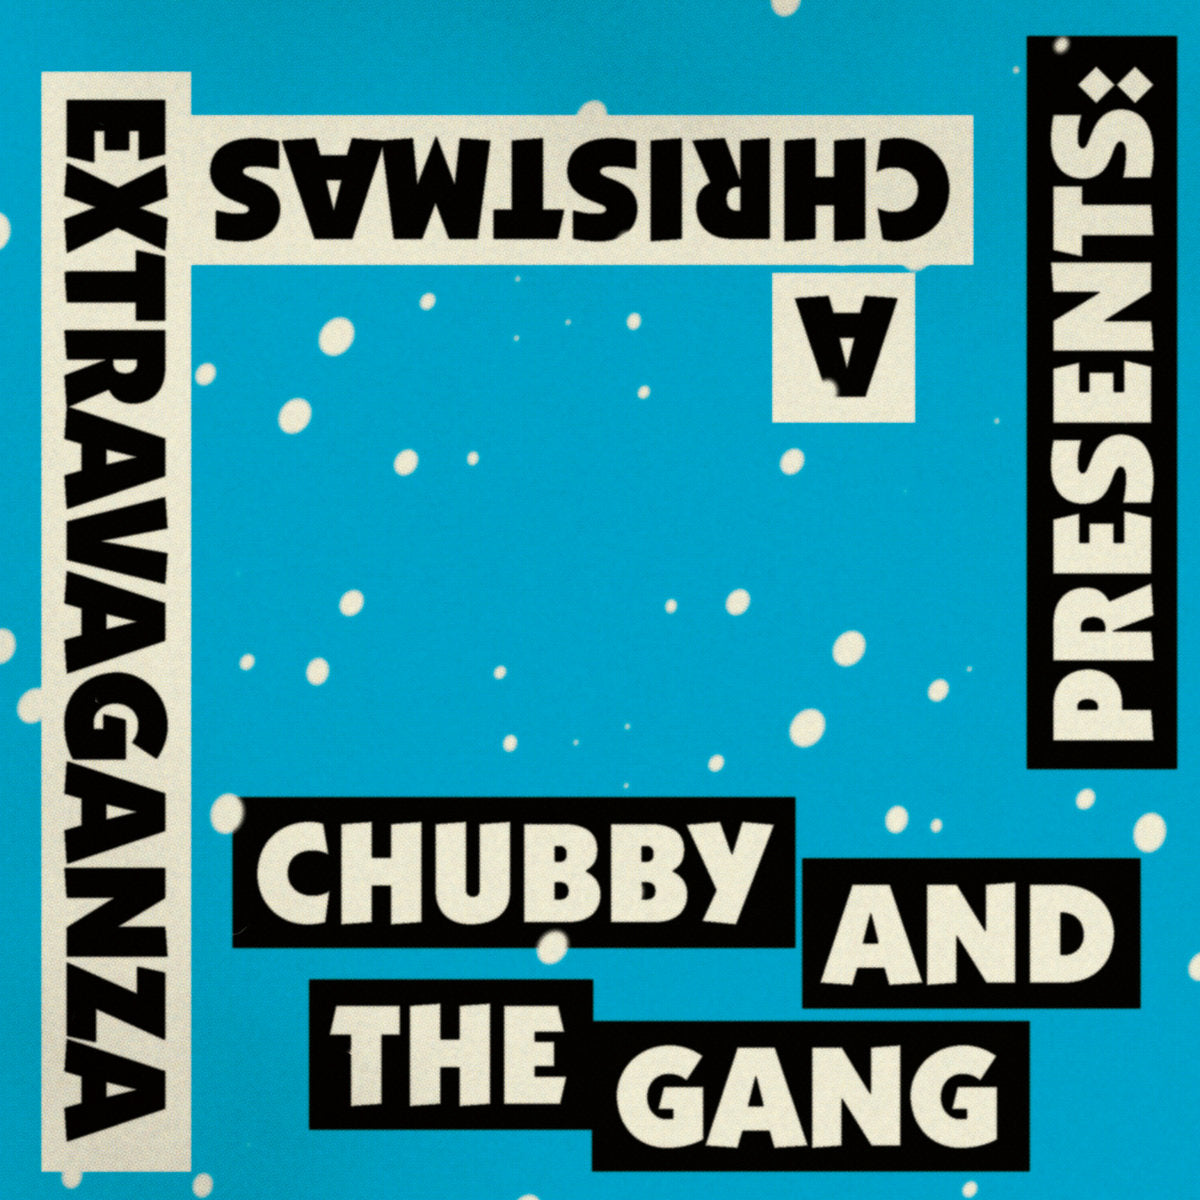 CHUBBY AND THE GANG "A Christmas Extravaganza" 7"